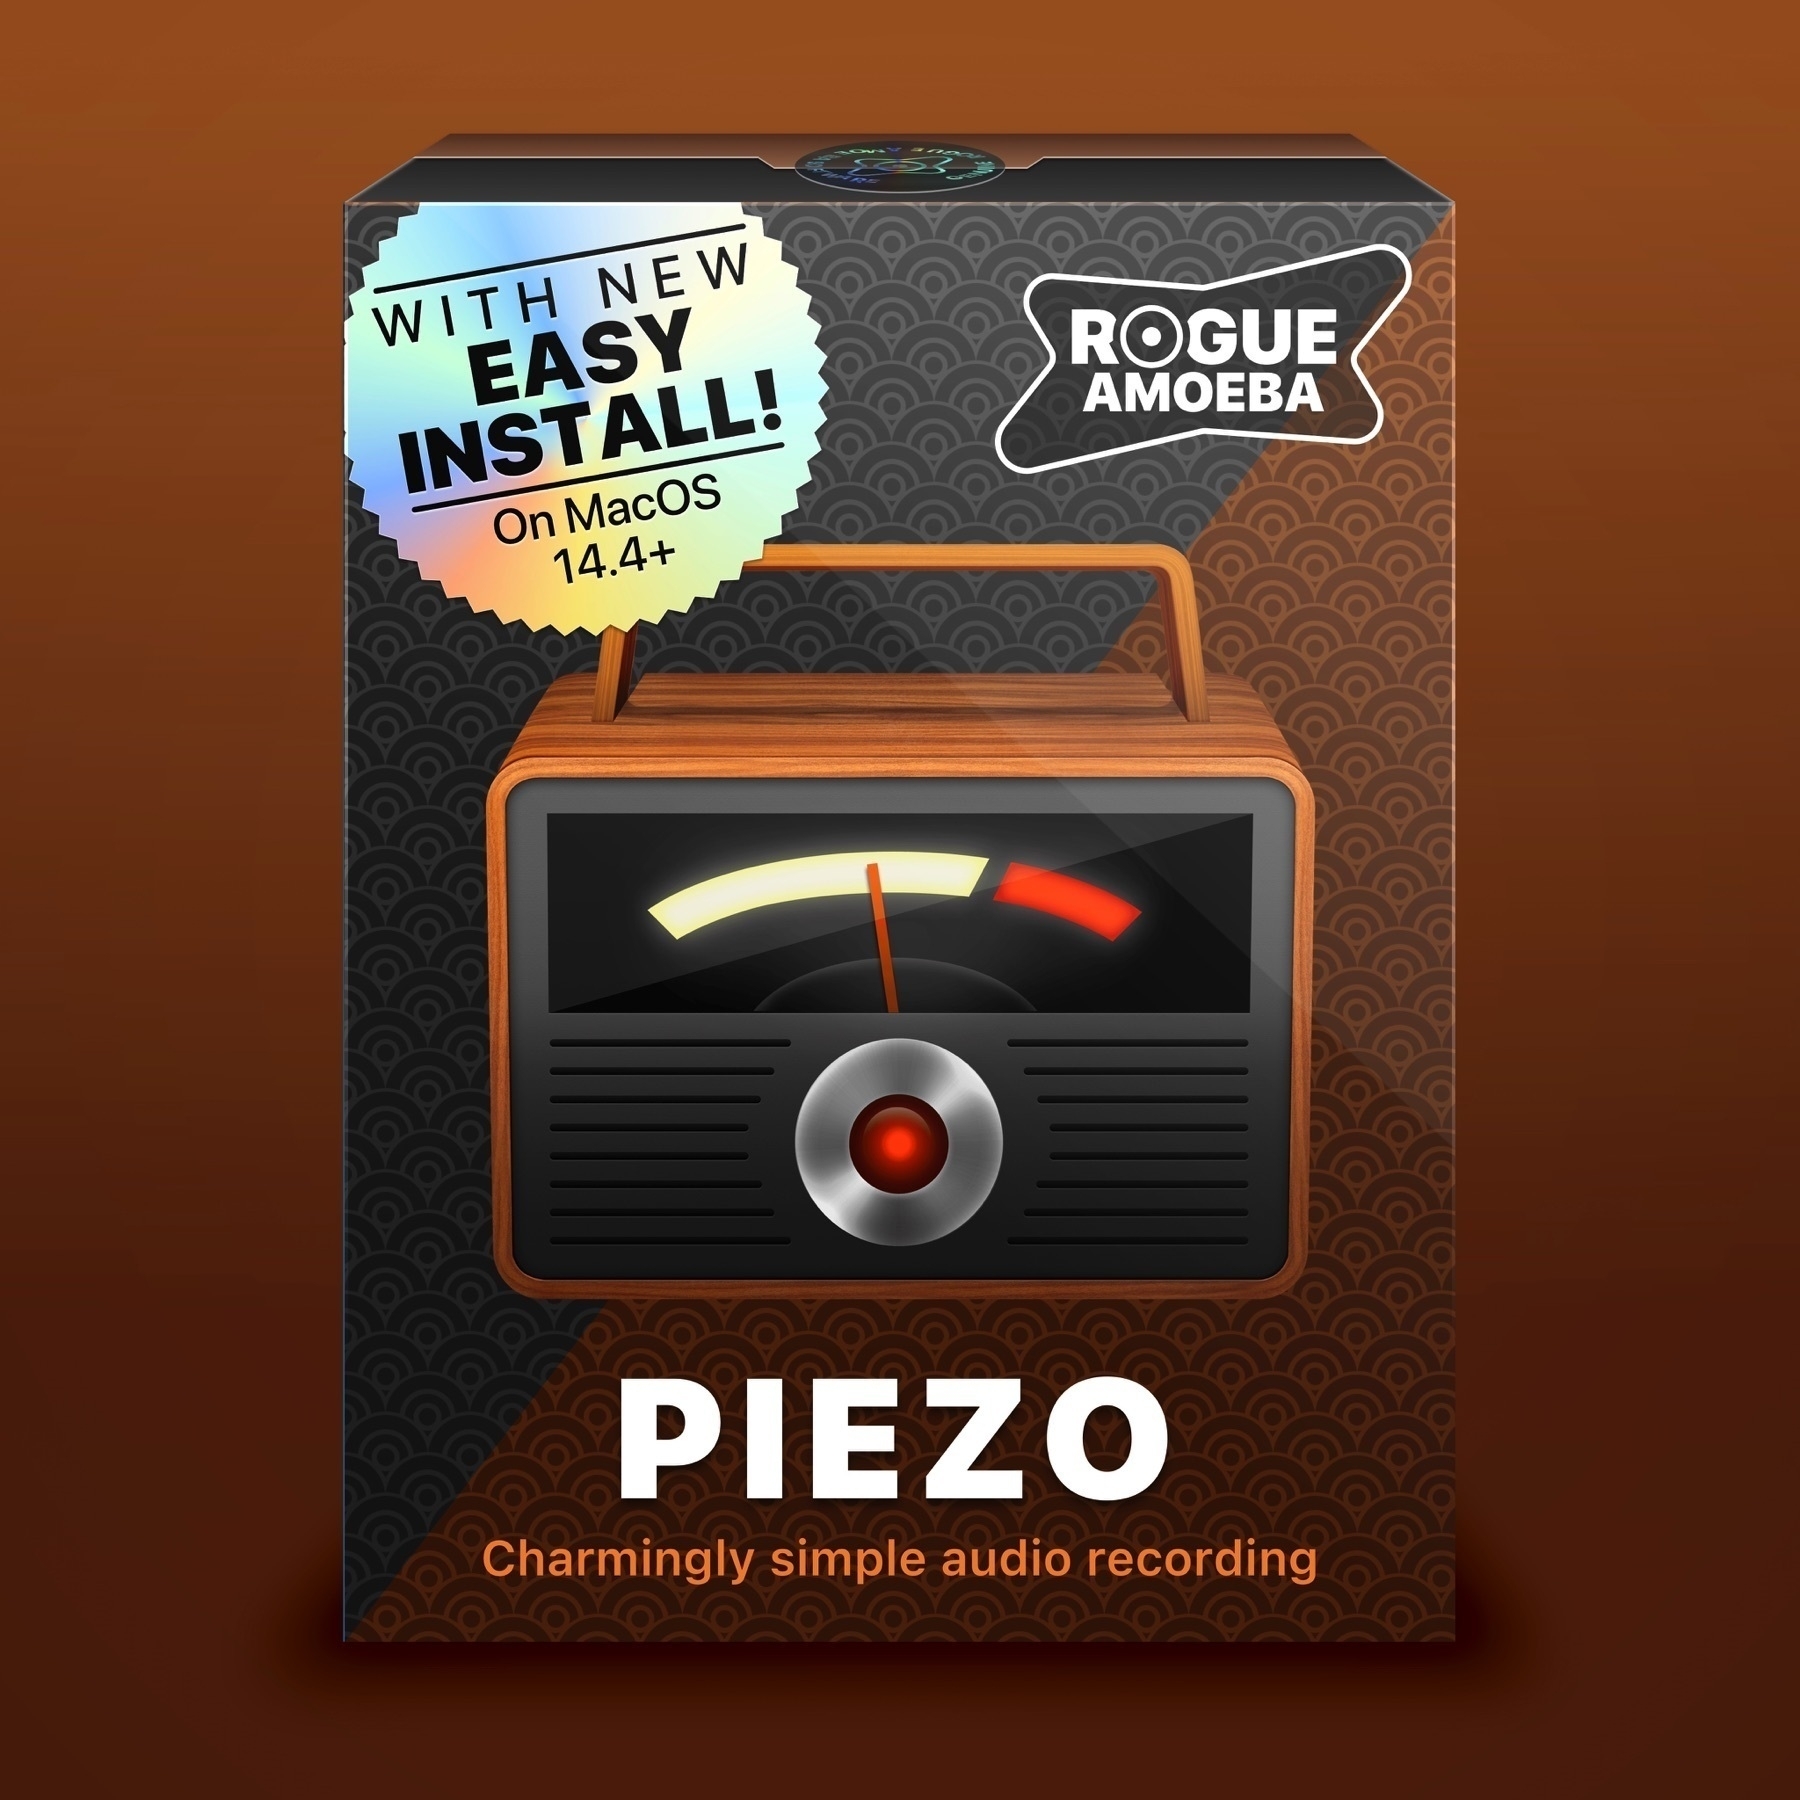 A rendered product box for Piezo